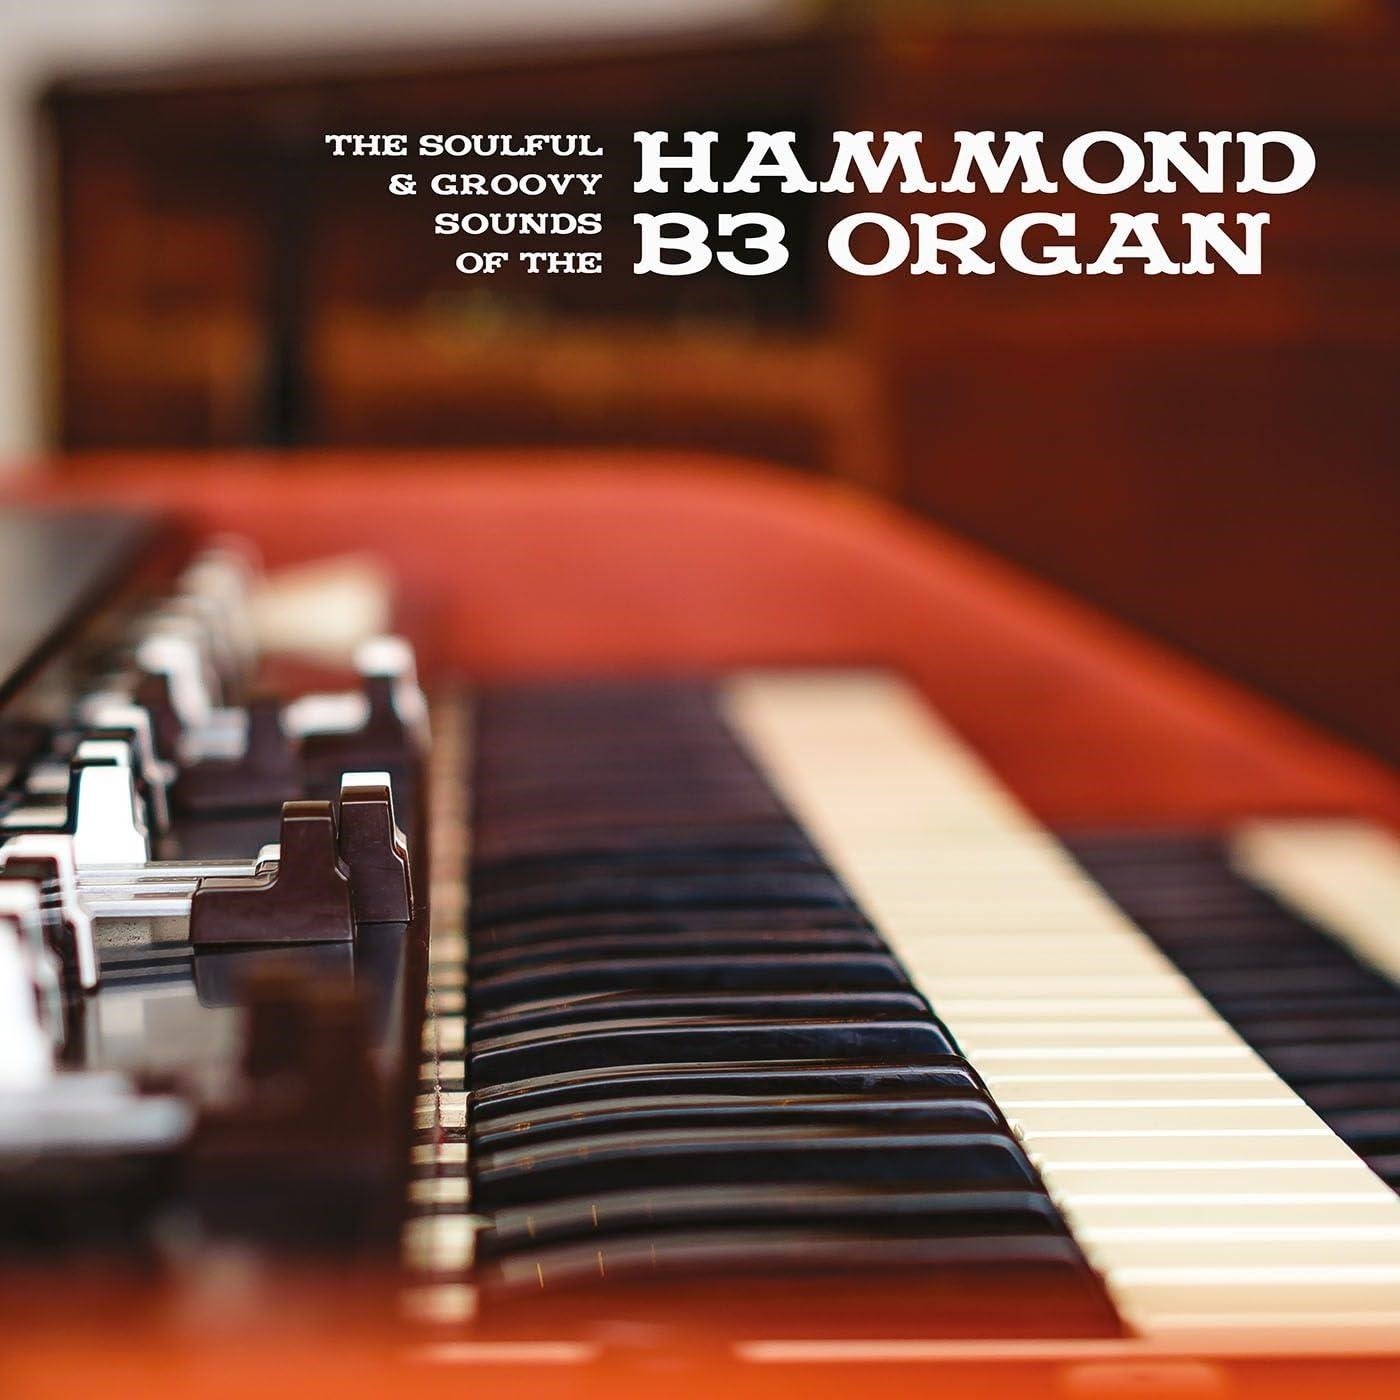 CD Shop - ARTISTS, VARIOUS THE SOULFUL & GROOVY SOUNDS OF THE HAMMOND B3 ORGAN